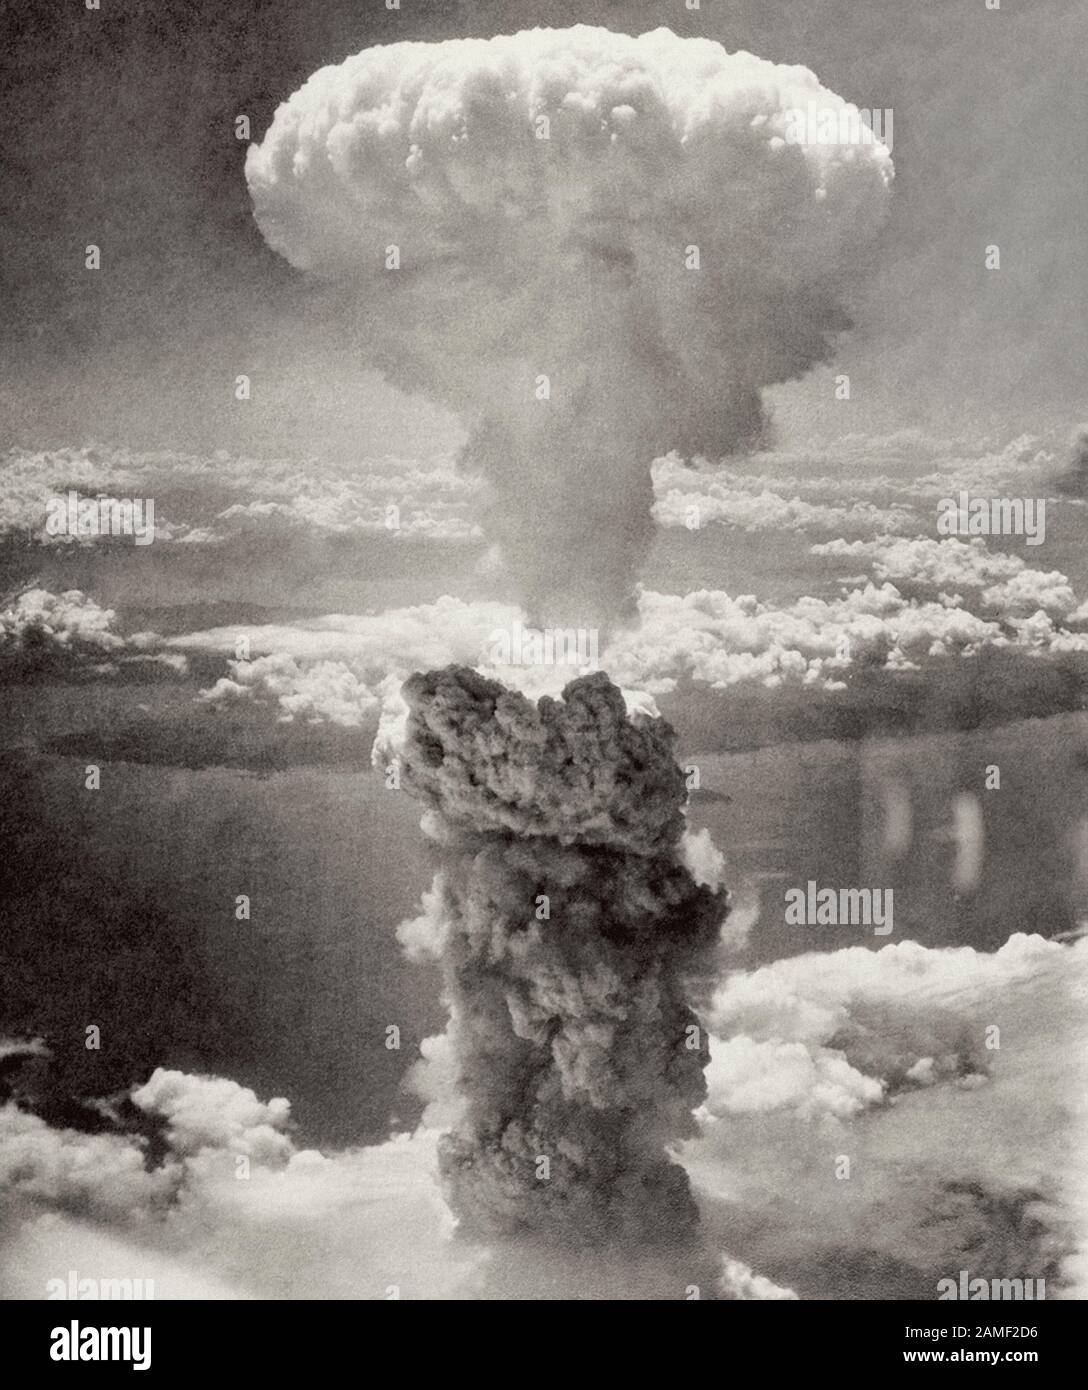 On August 6 and 9, 1945, the United States dropped nuclear bombs 'fat Man' (pictured) and 'Baby' on the Japanese cities of Hiroshima (70 thousand peop Stock Photo